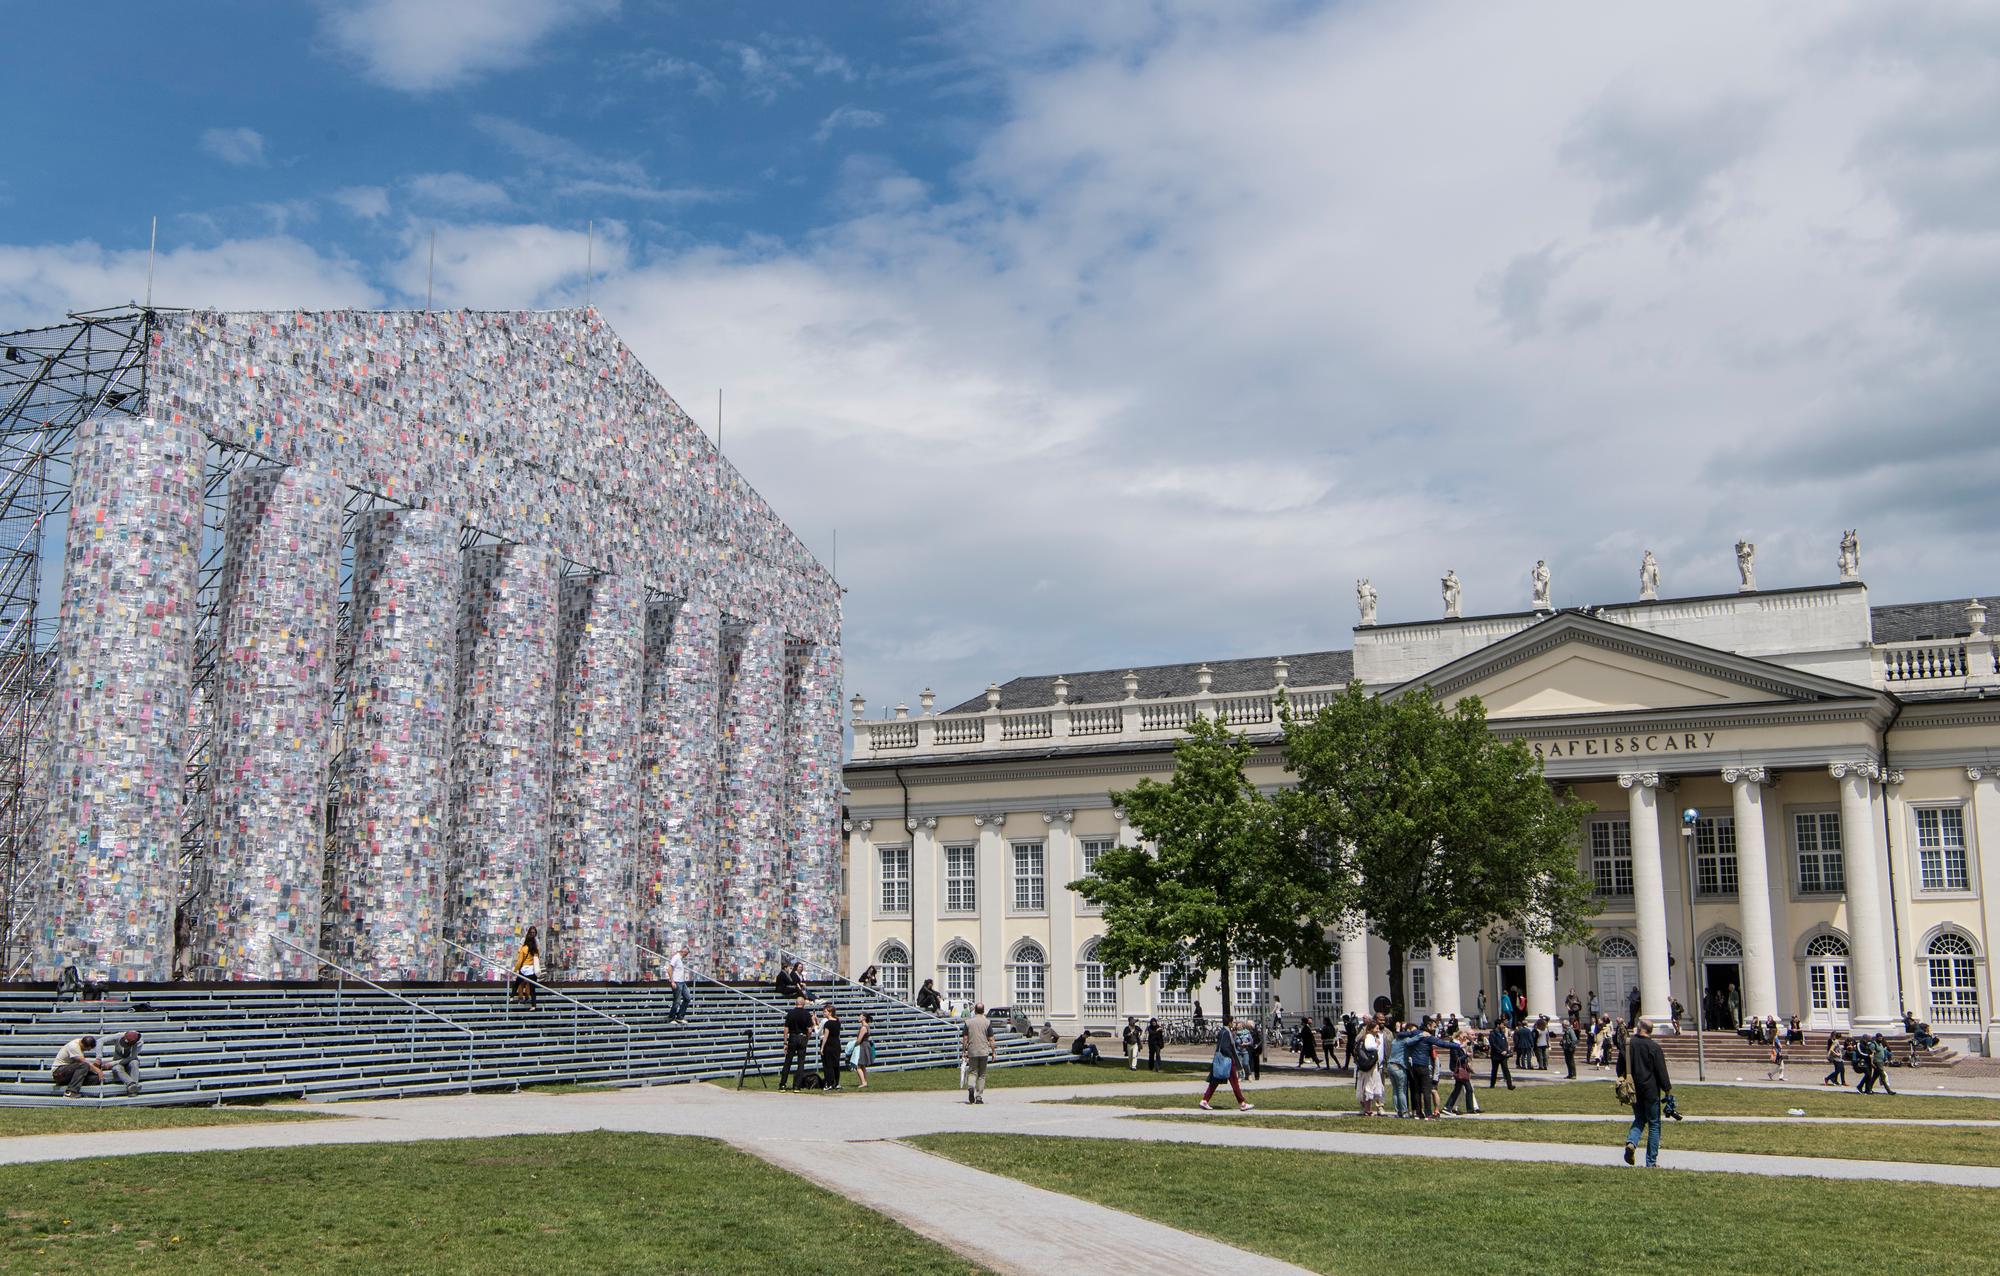 The "Parthenon of books" (l) by Argentinian artist Marta Minujin beside the Fridericianum at the documenta 14 art exhibition in Kassel, Germany, 8 June 2017. The documenta 14 art exhibition officially opens on 10 June 2017. [dpa Picture-Alliance/AFP - BORIS ROESSLER]